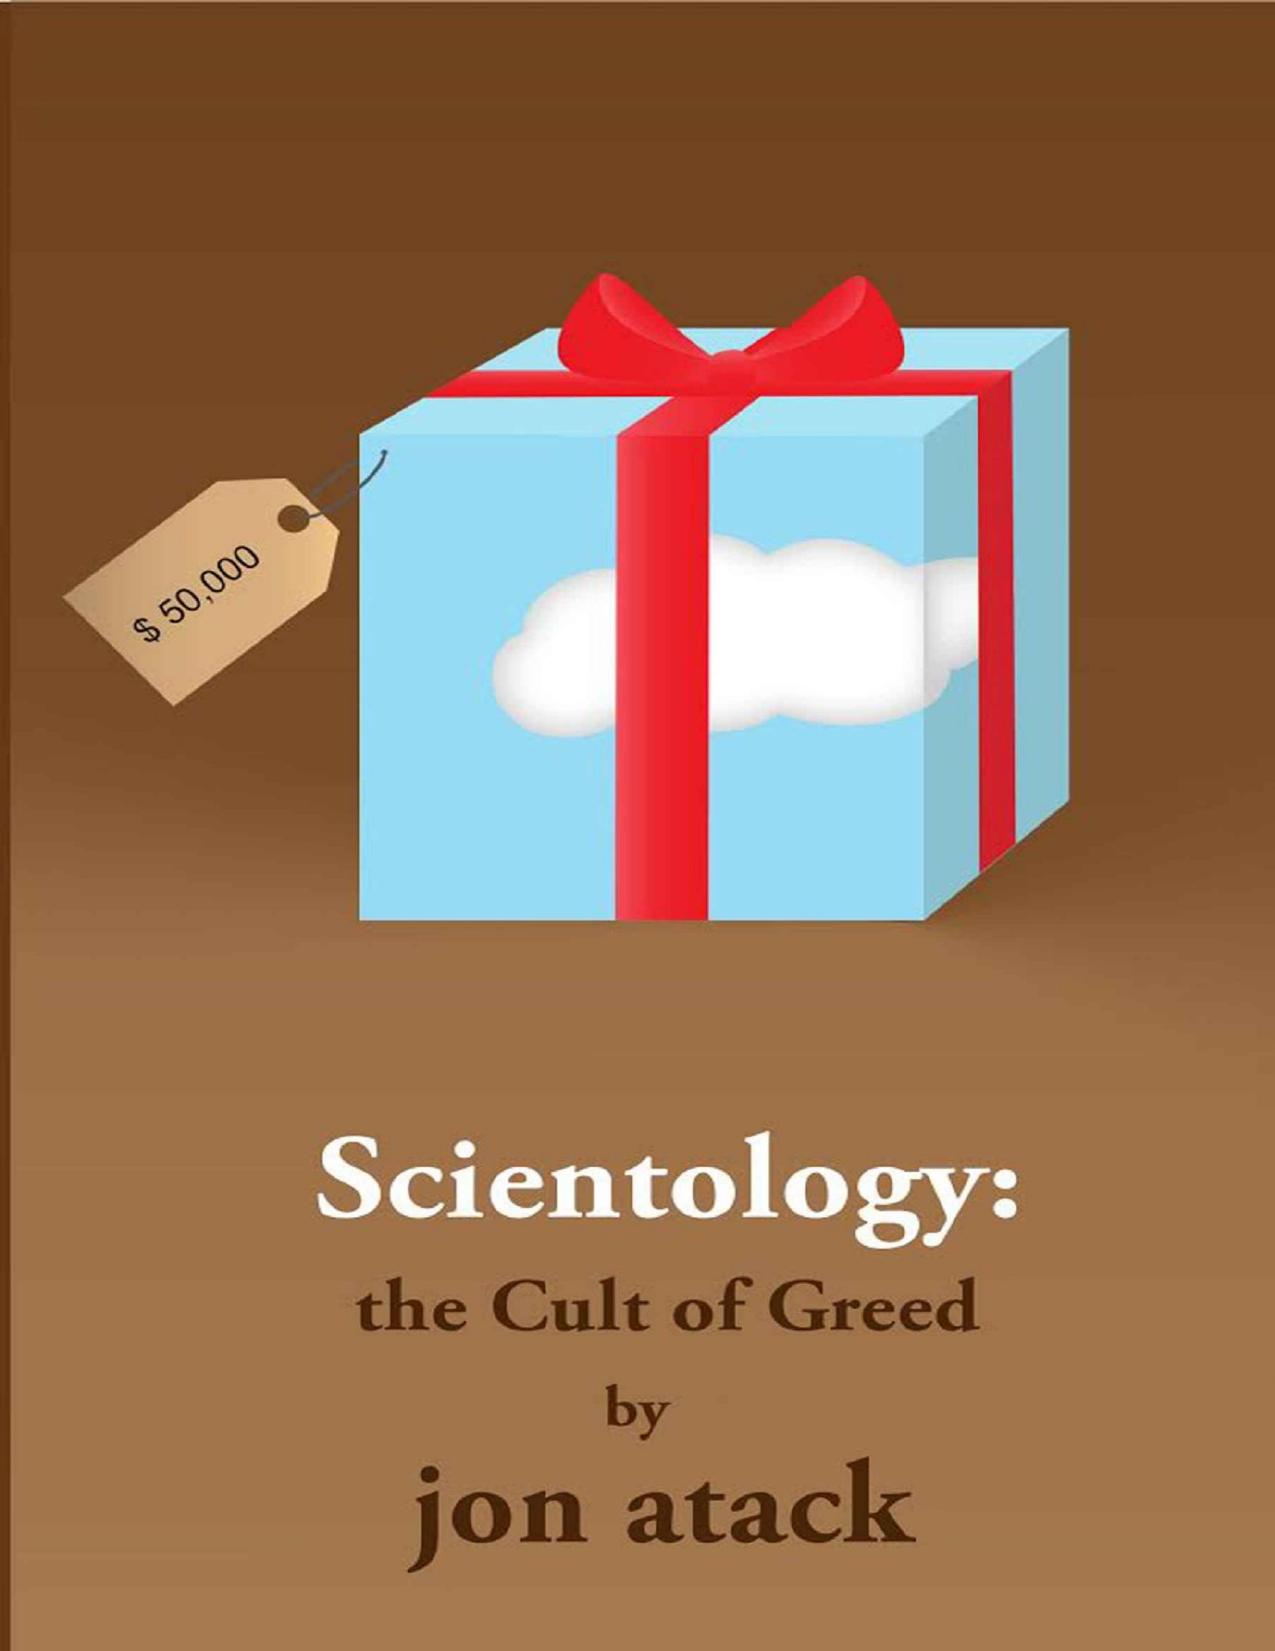 SCIENTOLOGY - The Cult of Greed by Jon Atack